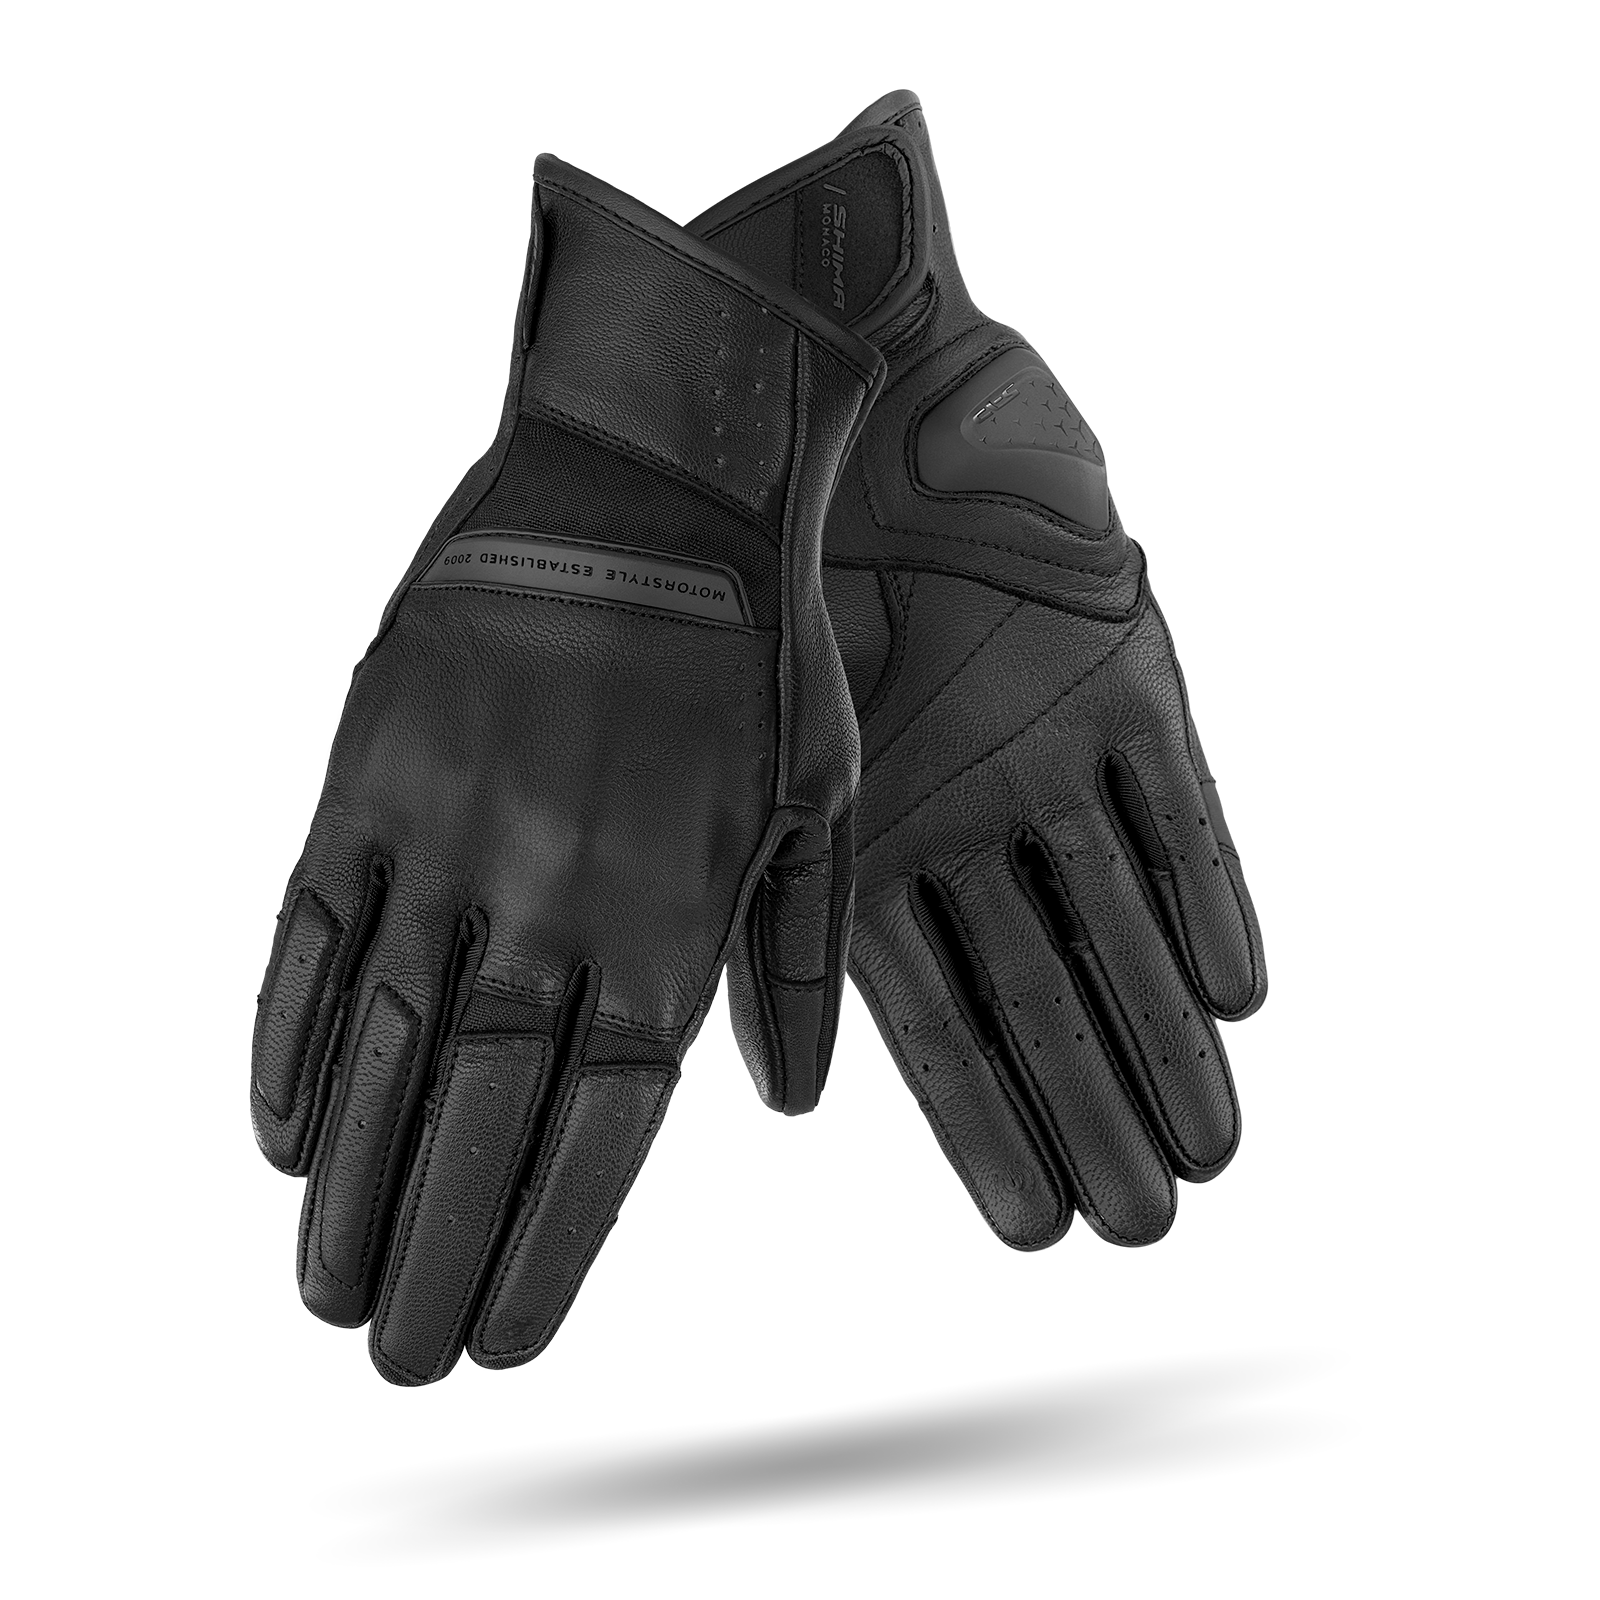 Black leather women's motorcycle gloves from Shima